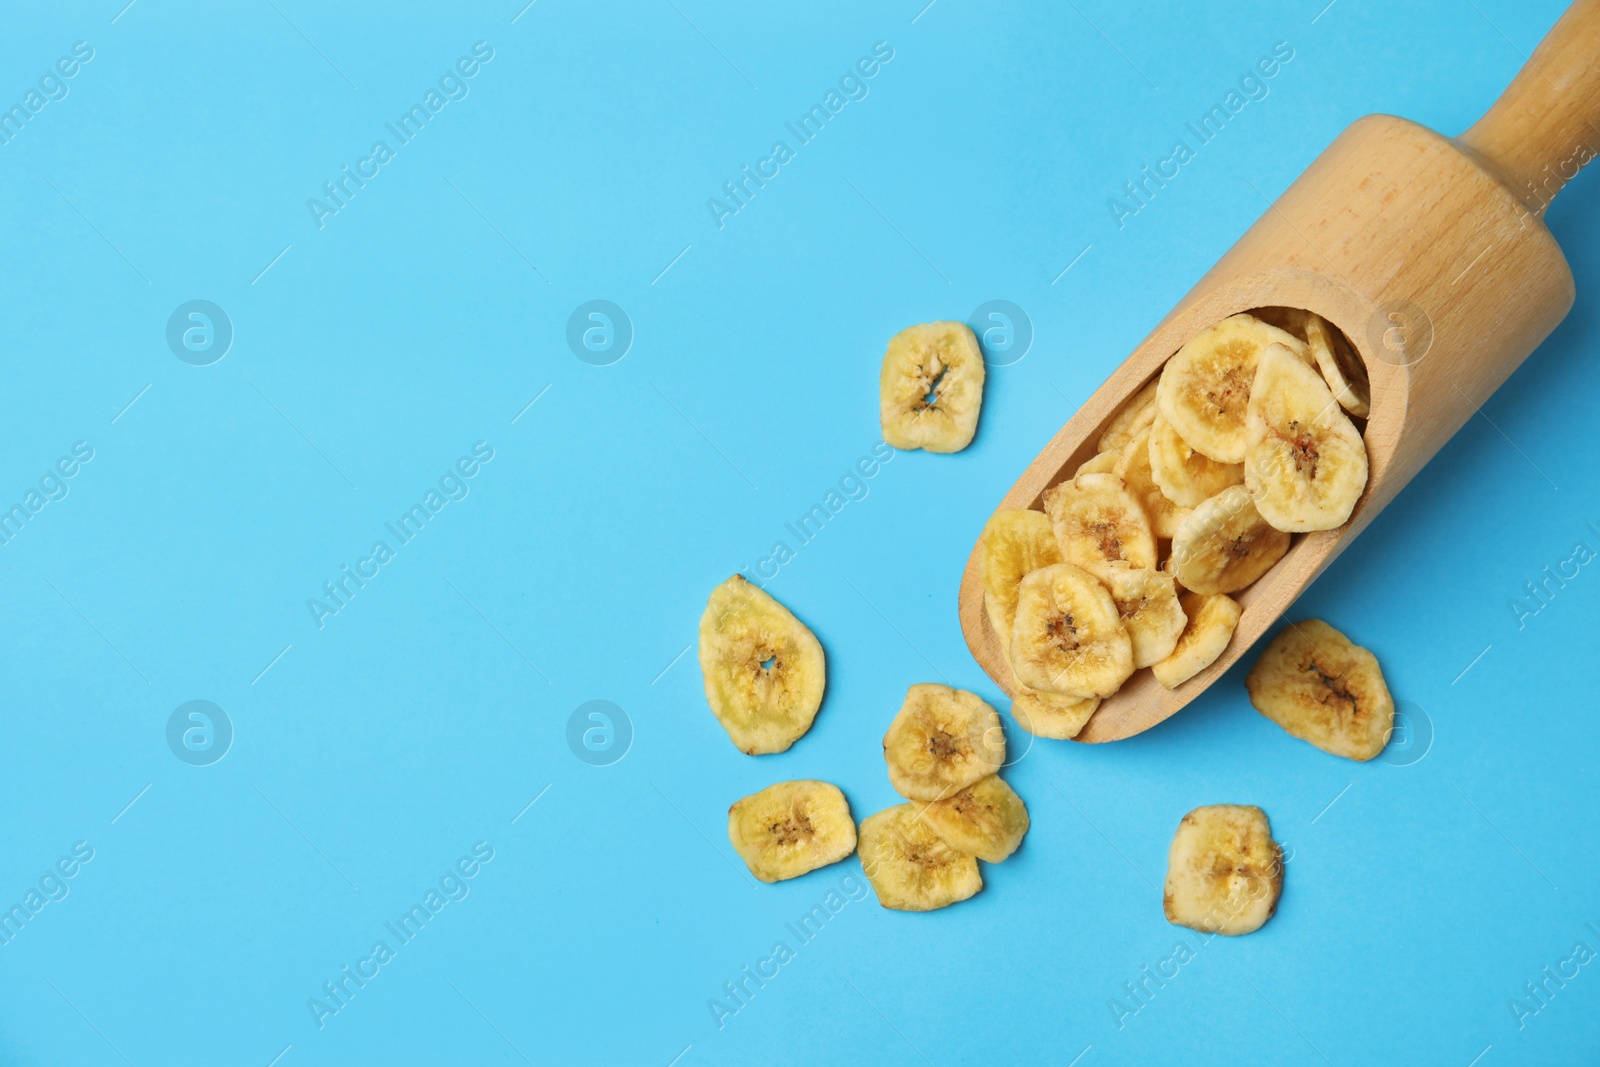 Photo of Wooden scoop with banana slices on color background, top view with space for text. Dried fruit as healthy snack